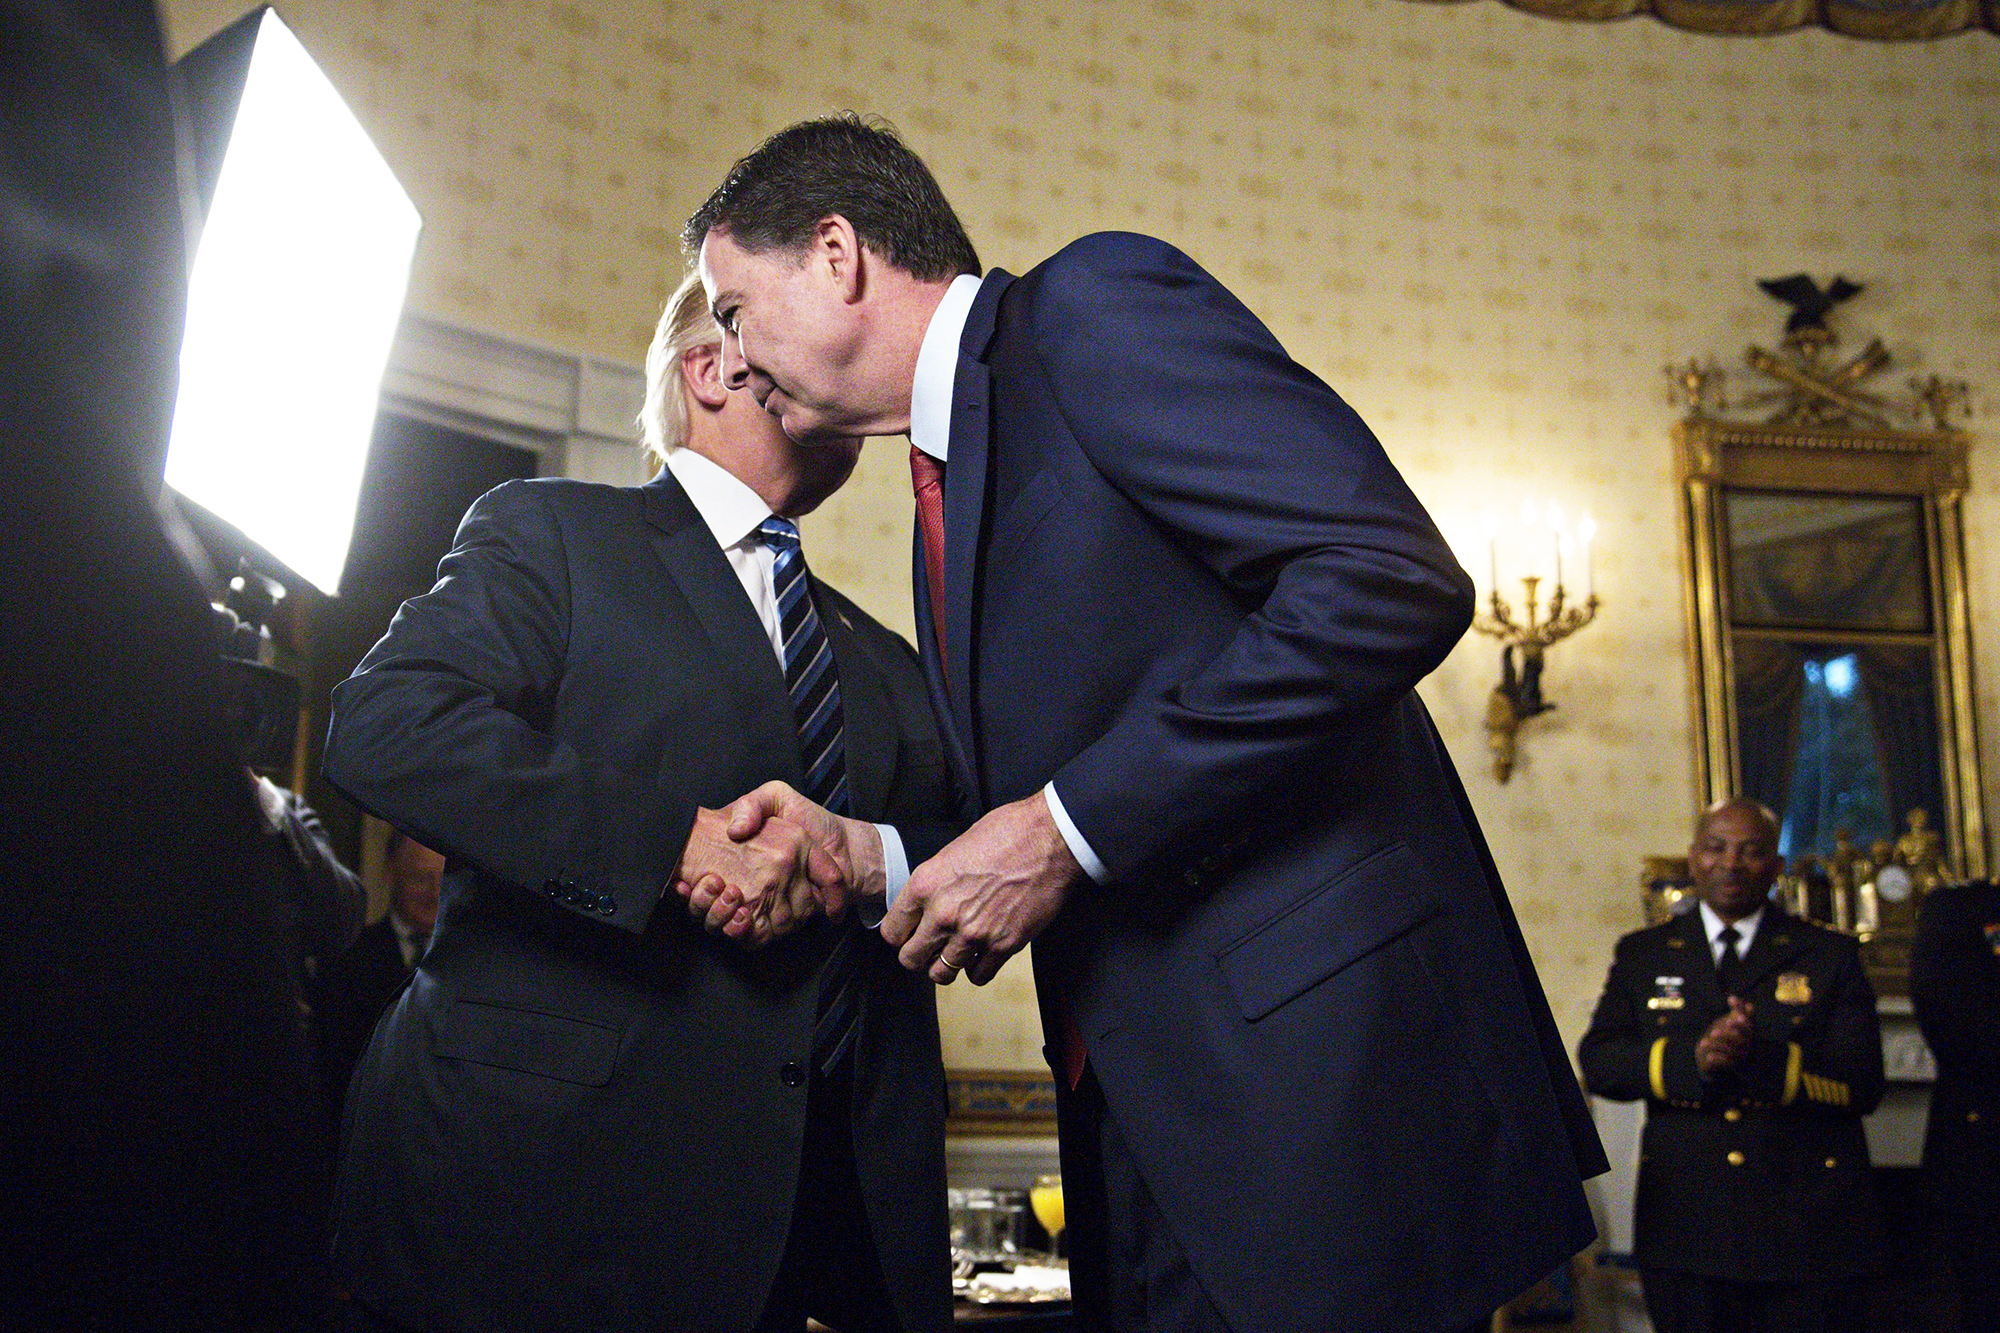 Donald Trump shakes hands while attempting to embrace former FBI Director James Comey in Washington, D.C., on Jan. 22, 2017.